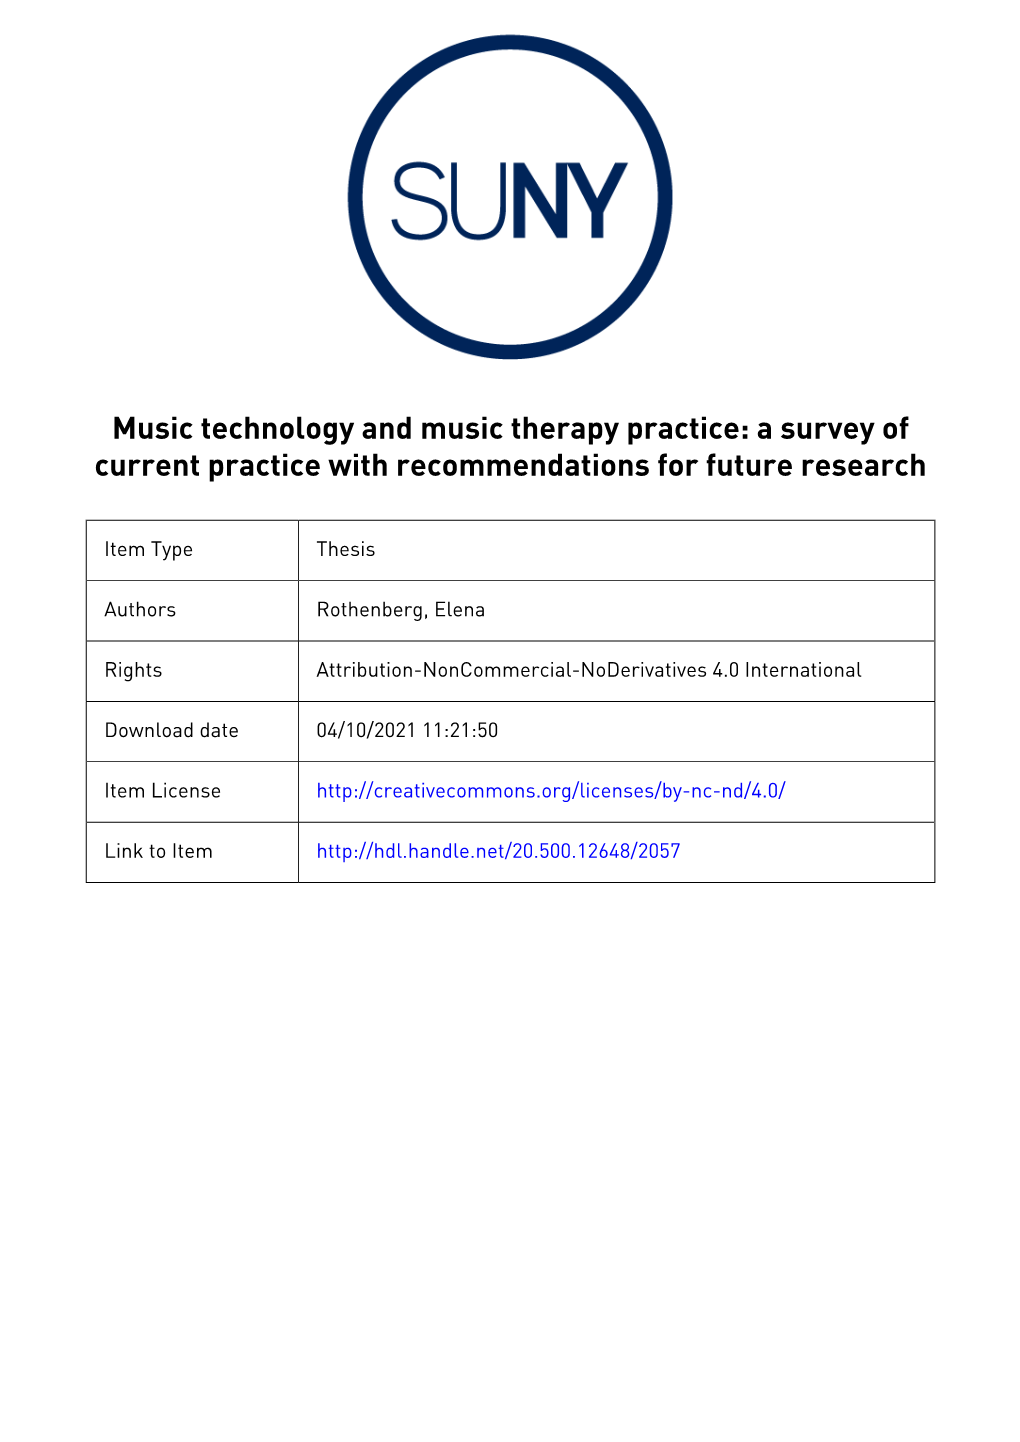 Music Technology and Music Therapy Practice: a Survey of Current Practice with Recommendations for Future Research